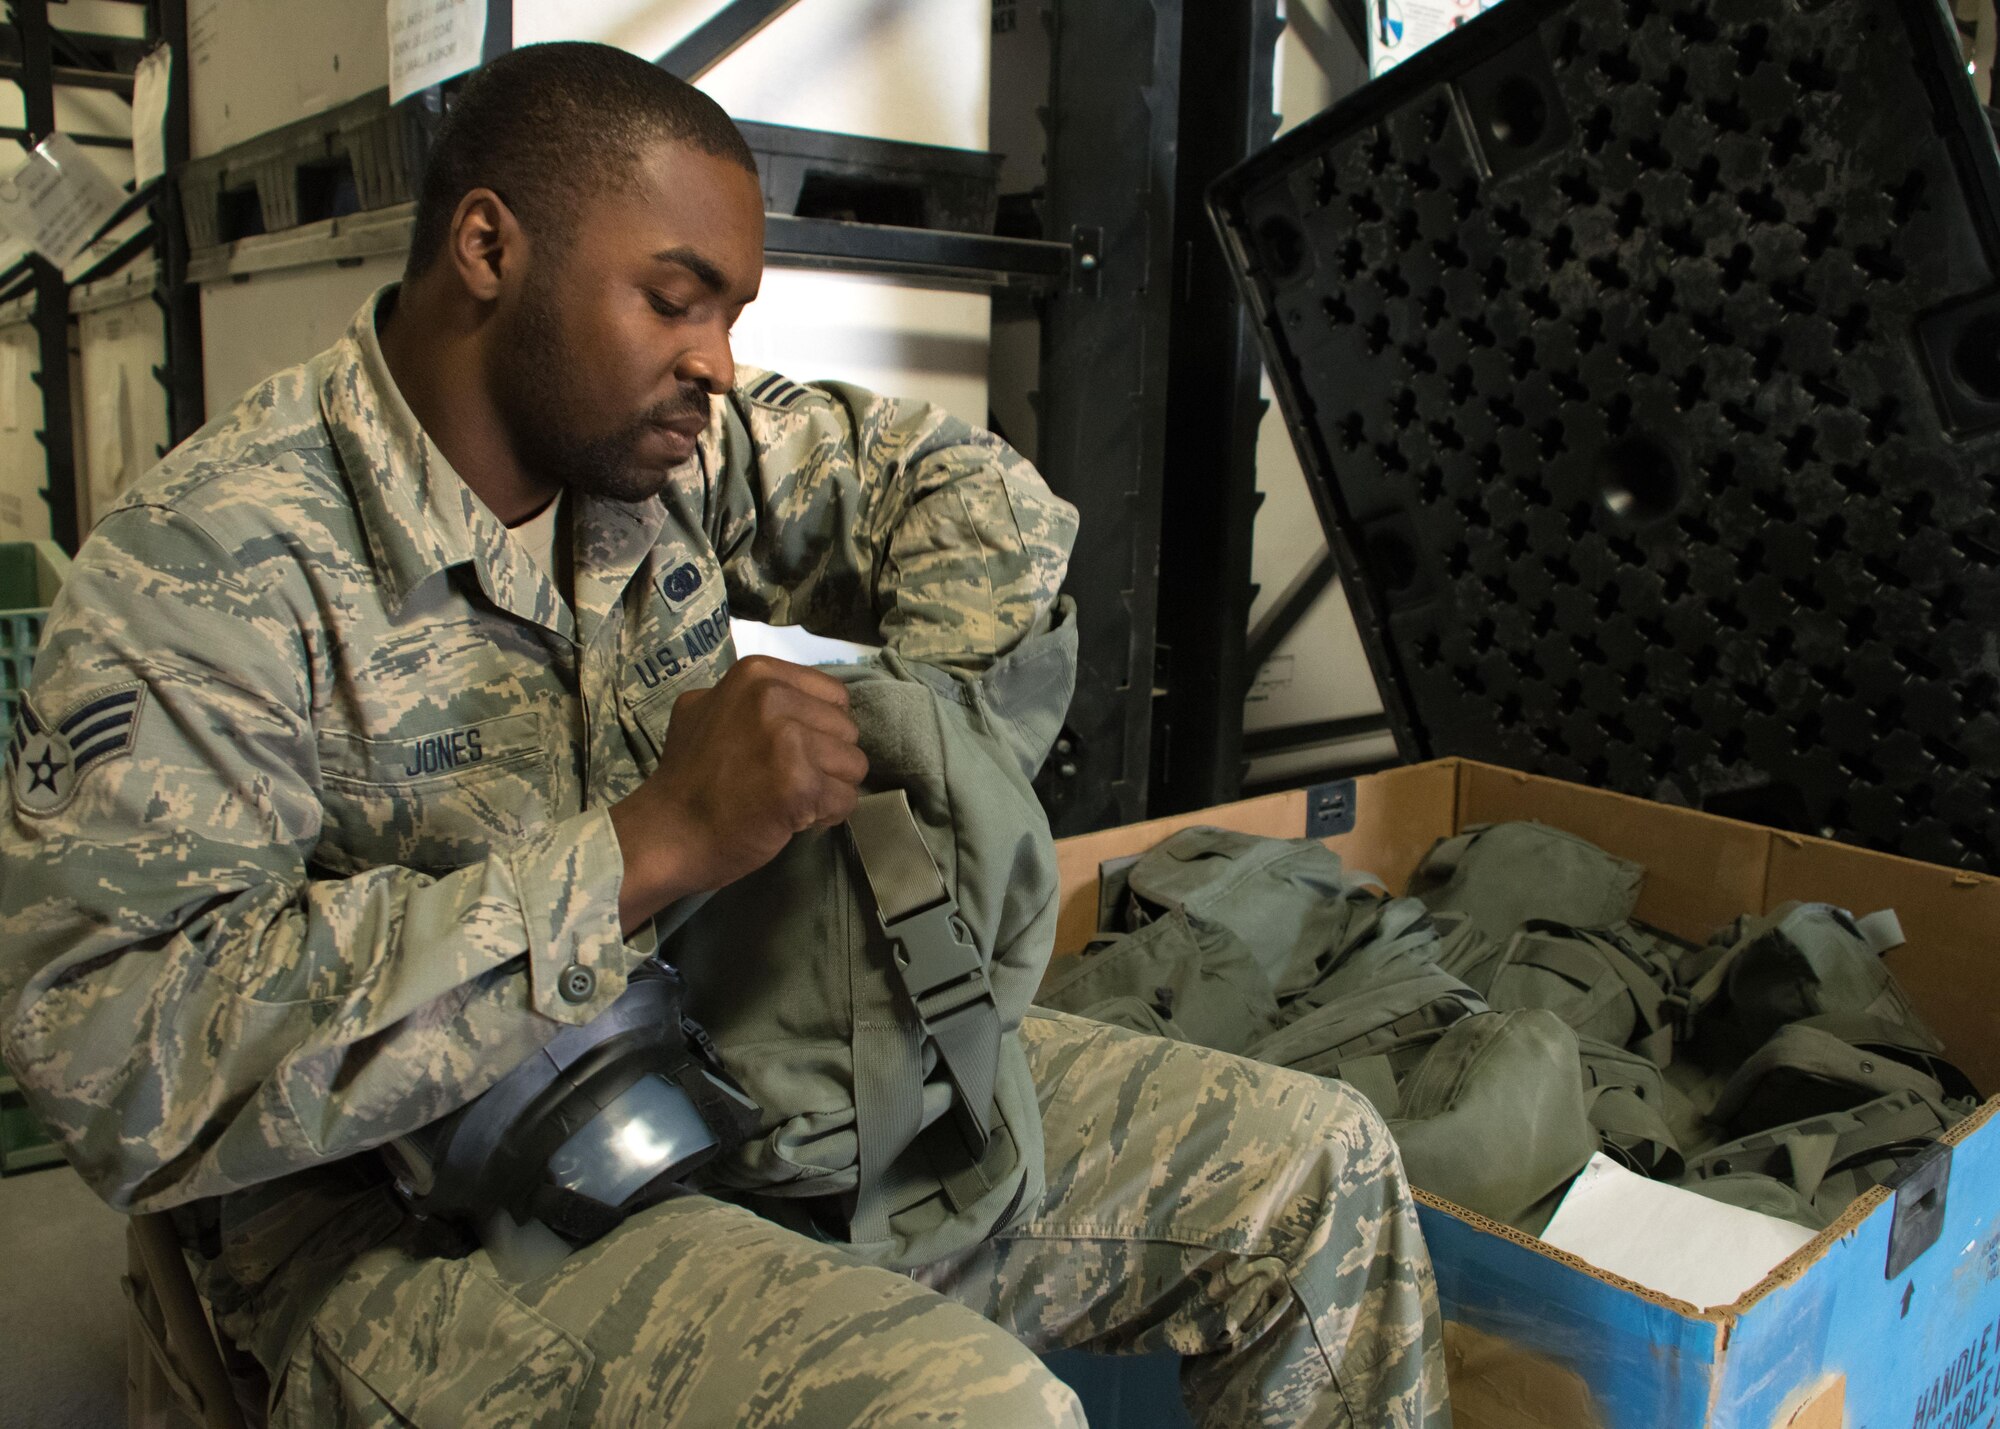 Senior Airman Antonio Jones, a 386th Expeditionary Logistics Readiness Squadron mobility technician, inventories gas masks at an undisclosed location in Southwest Asia April 7, 2017. Jones is part of the 386th ELRS expeditionary theater distribution center and is responsible for inspecting equipment and then issuing it to forward deployers. (U.S. Air Force photo/Staff Sgt. Andrew Park)